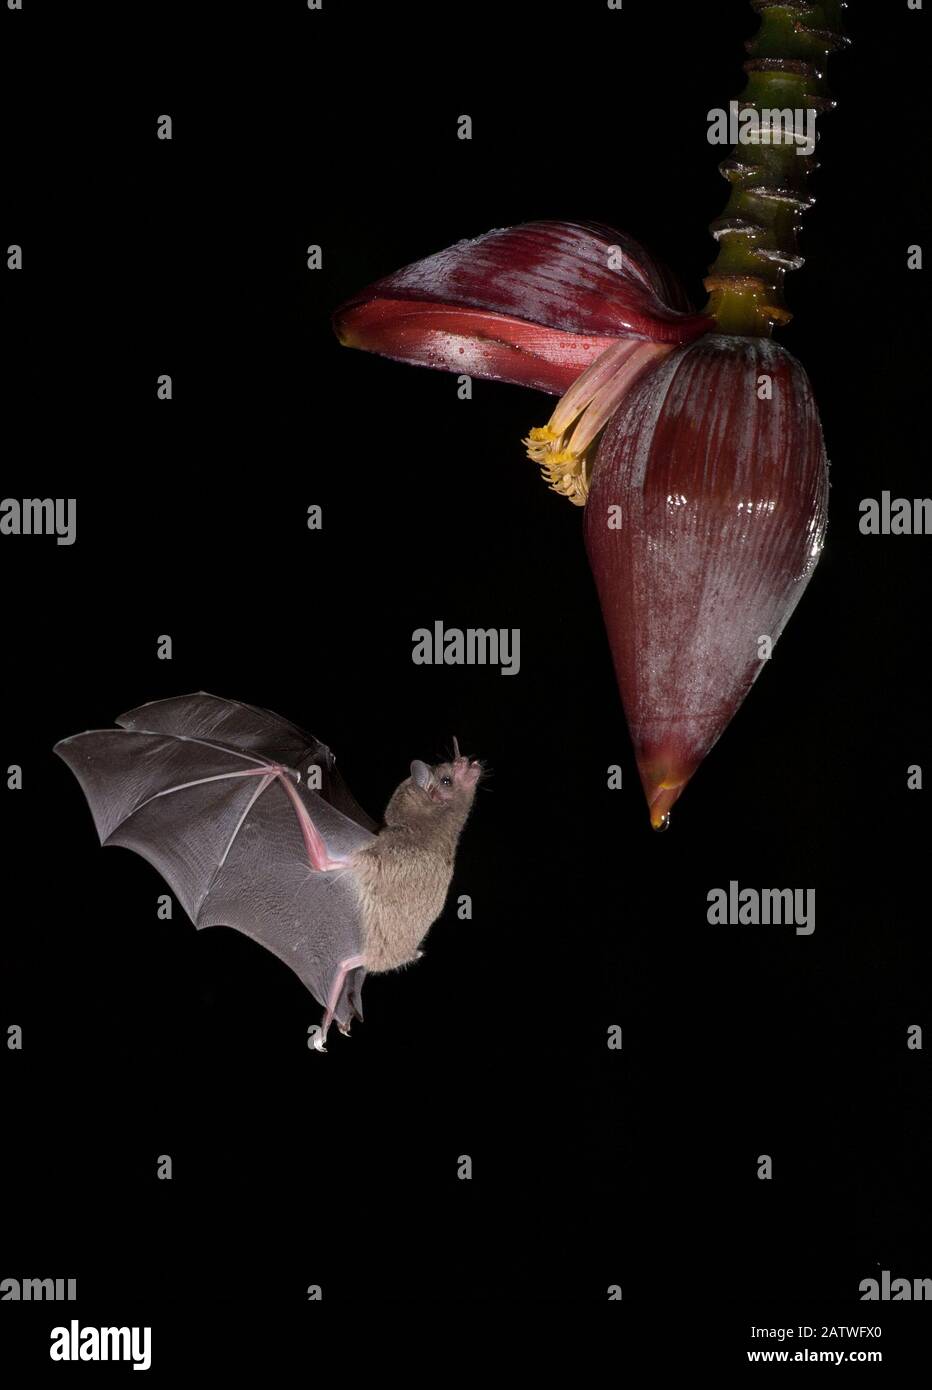 Leaf-nosed bat (Phyllostomidae sp) flying towards Banana (Musa sp) flower to feed. Costa Rica. Stock Photo